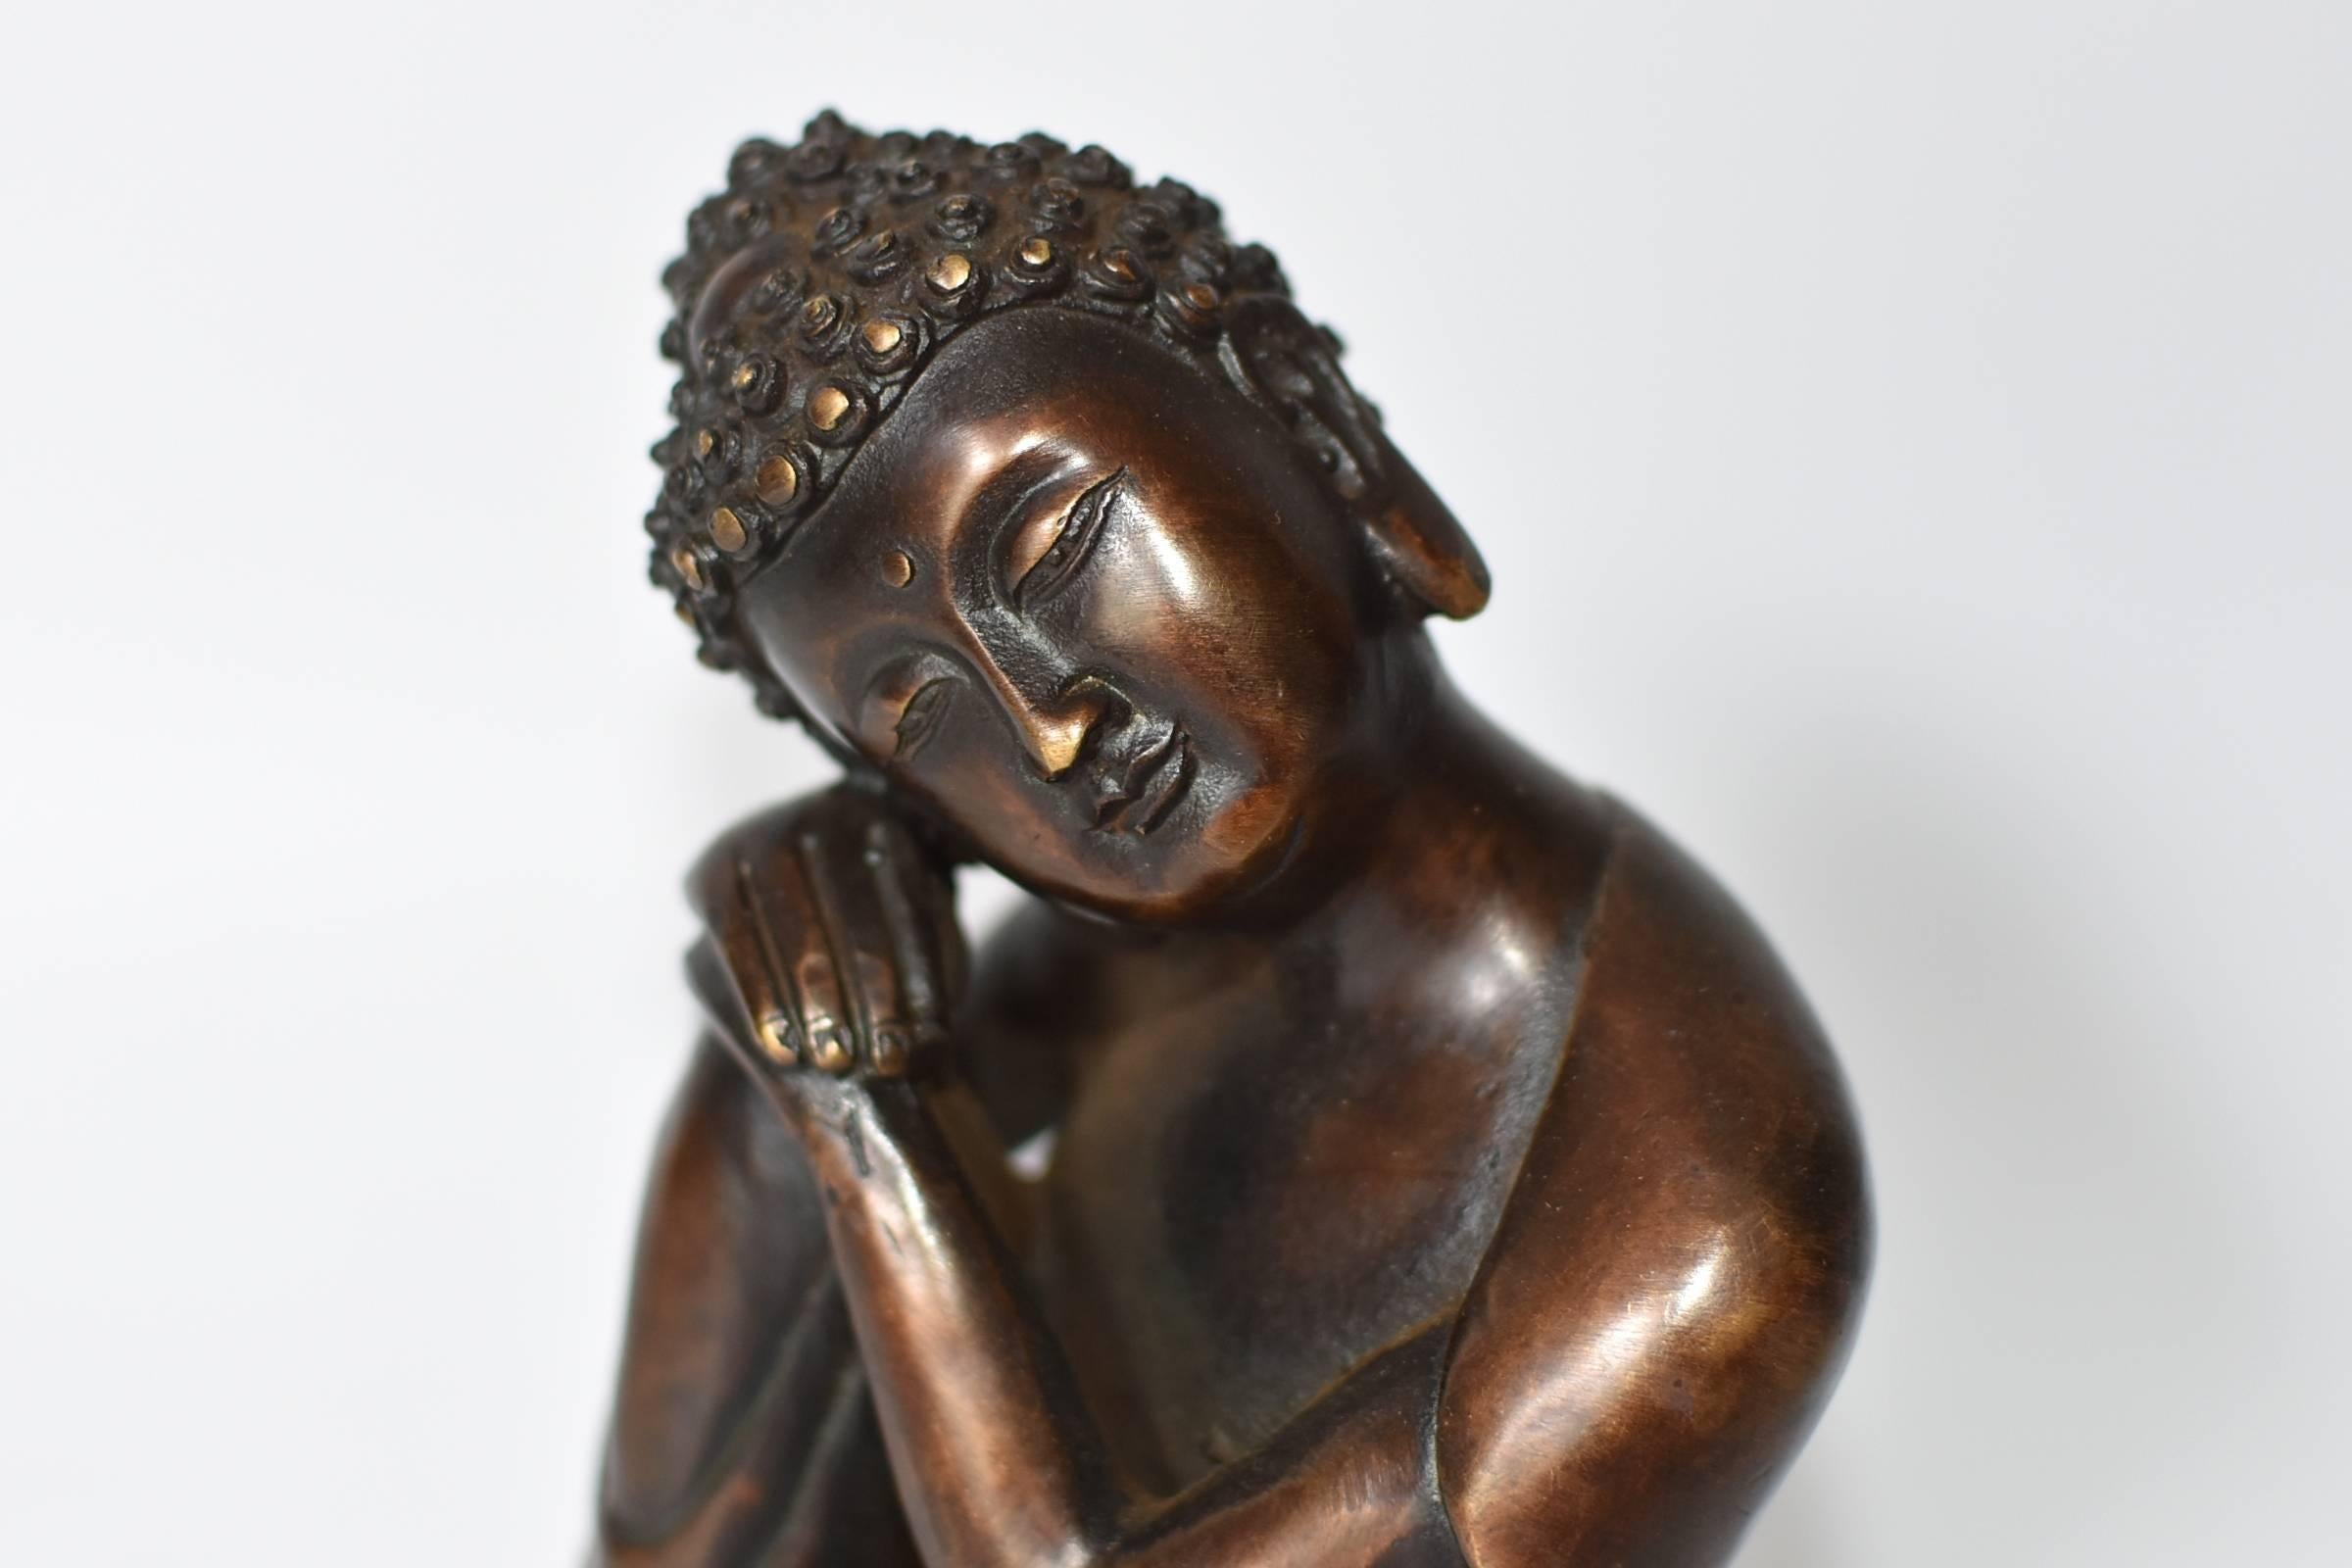 A beautiful bronze contemplative Buddha. This is a rare version of Buddha depiction, in an unique style. Through fine craftsmanship, the statue conveys a sense of peace and calm. This piece is small and exquisite, perfect as a desk top sculpture and